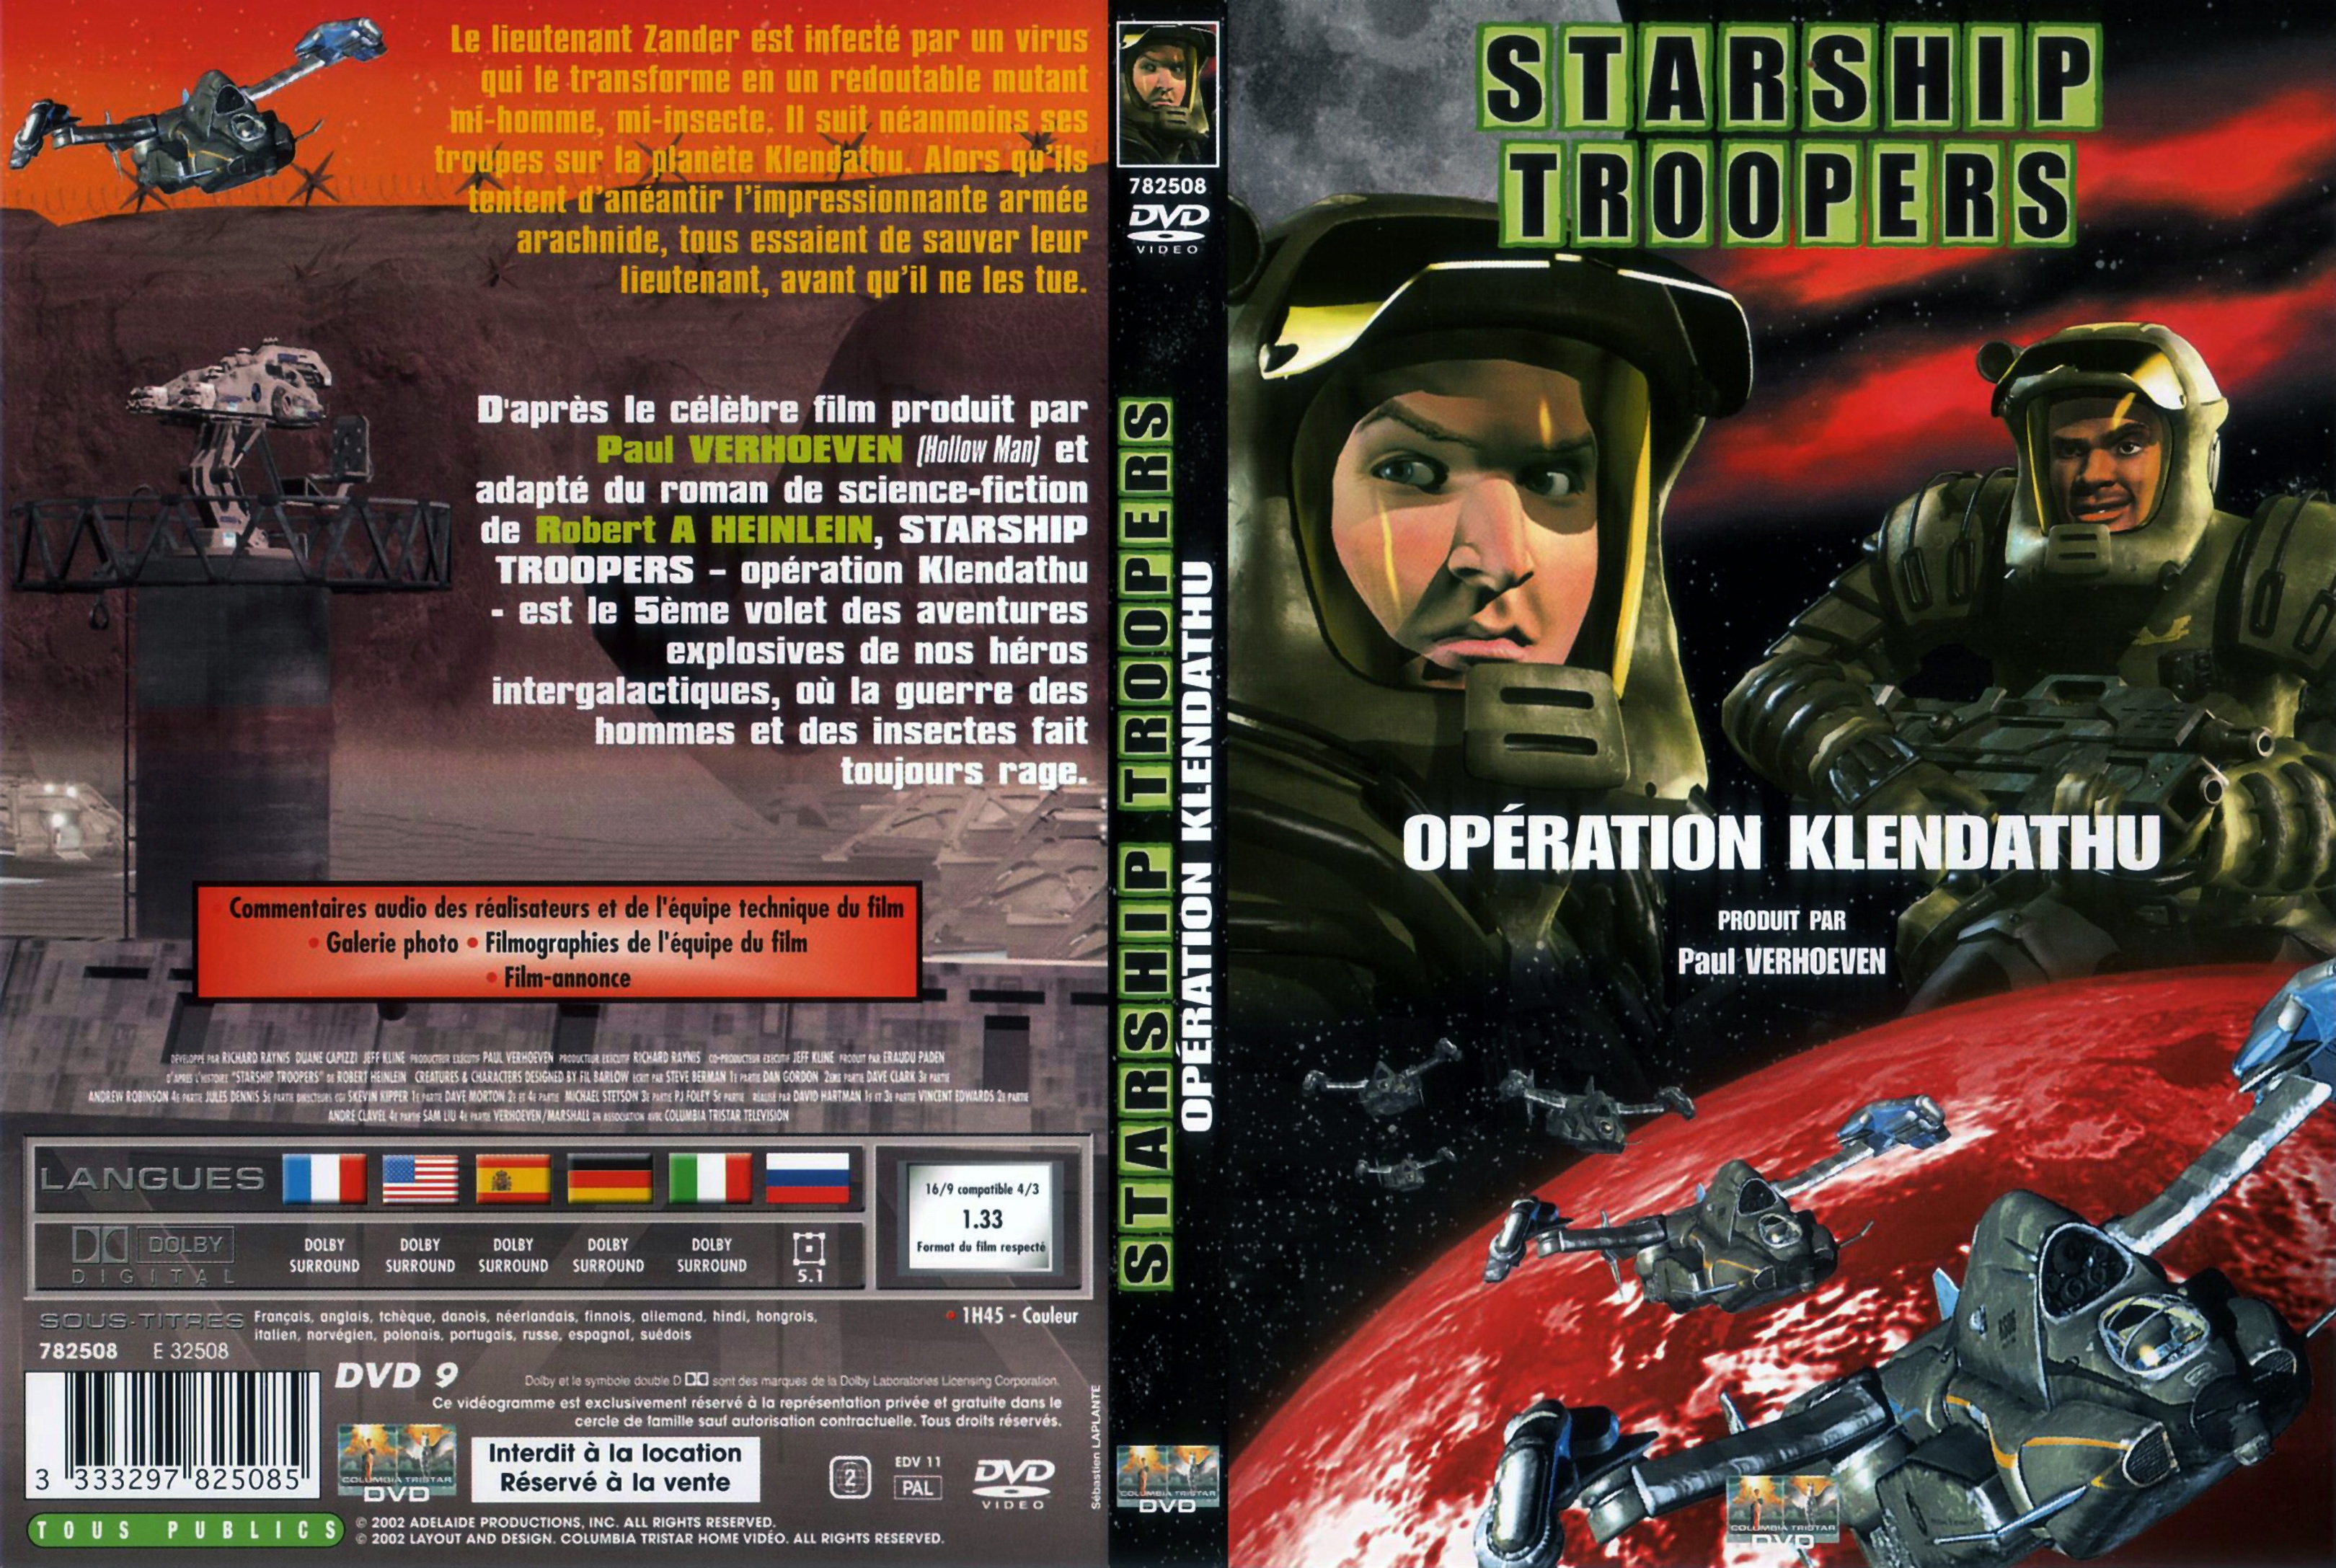 Jaquette DVD Starship troopers operation klendathu